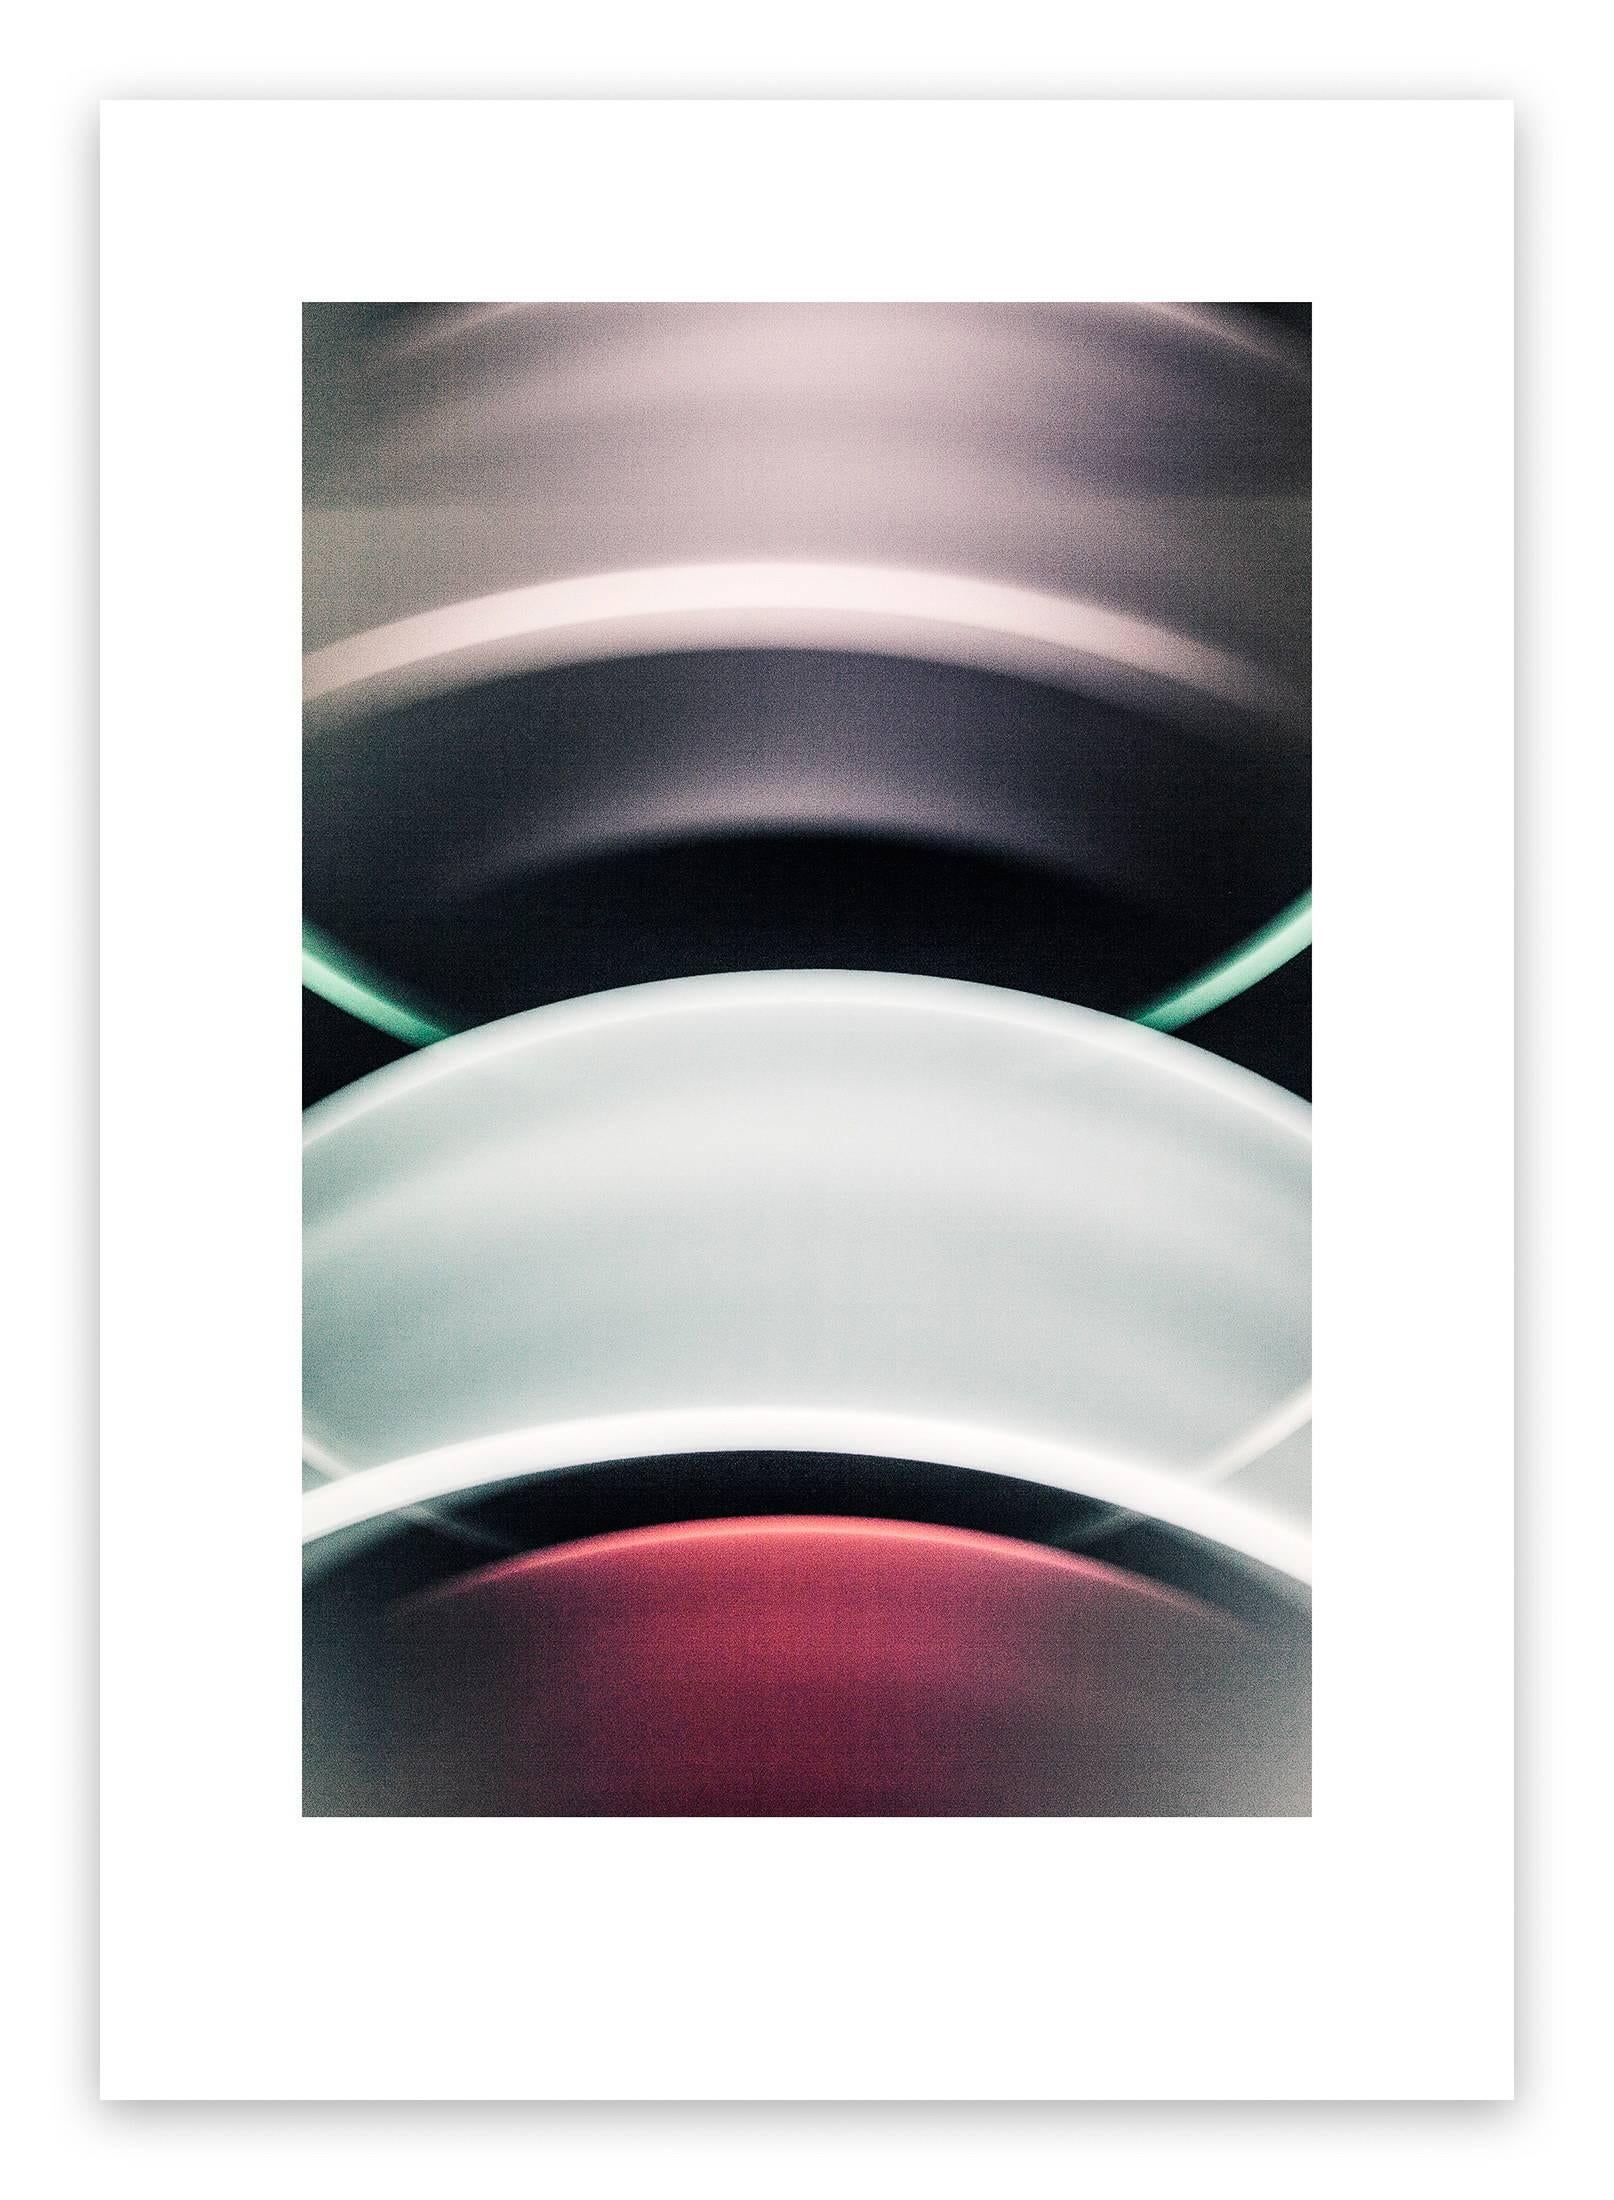 Nicht in die laufende trommel greifen 12  (Abstract Photography)

UltraChrome HD Ink on Hahnemühle paper. Unframed. 

With this series Luuk de Haan examines the deformation and alteration created by the camera as it translates two-dimensional shapes